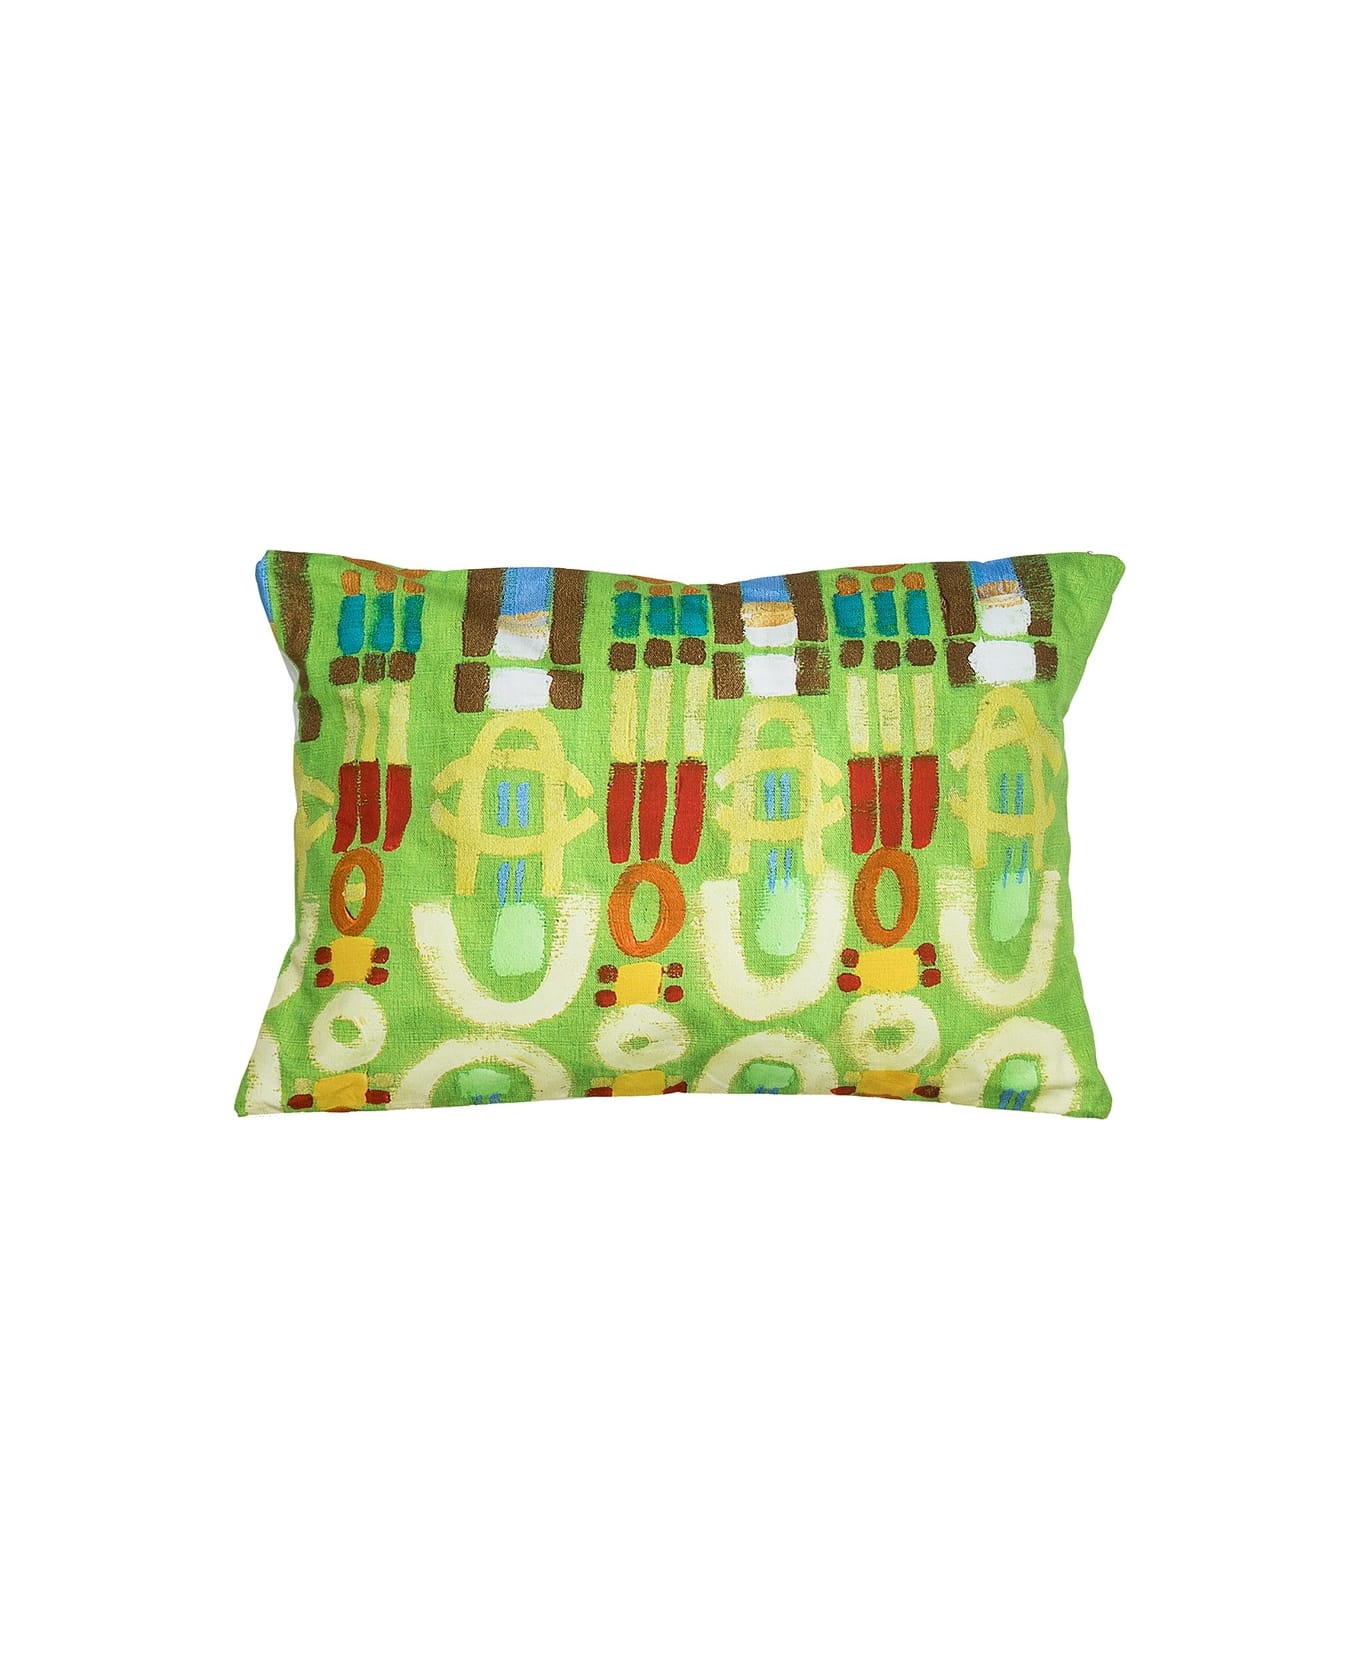 Le Botteghe su Gologone Printed Cushions 40x60 Cm - Lime Green クッション